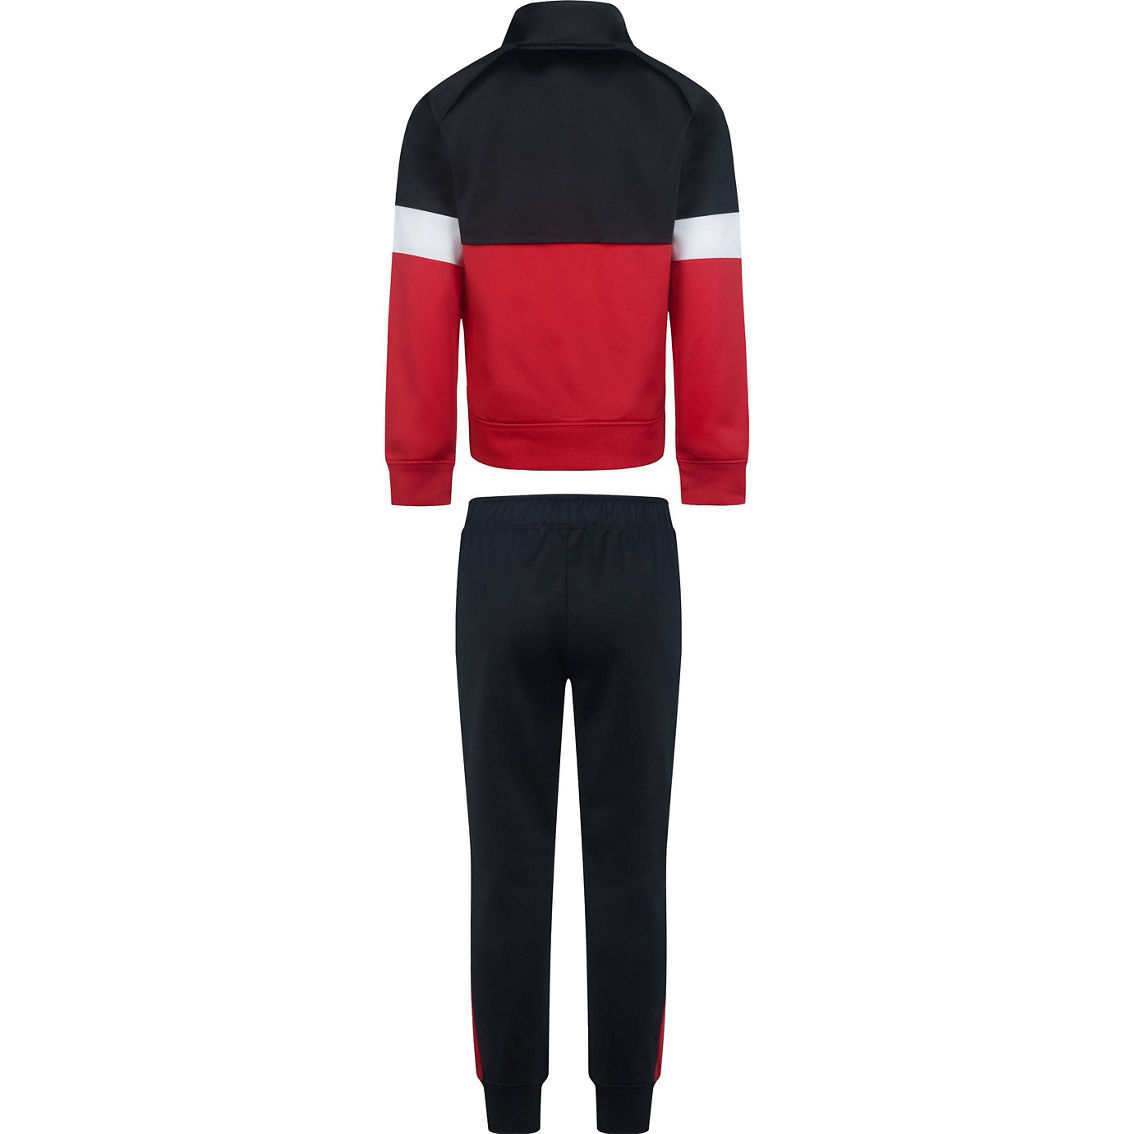 Nike Little Boys Colorblock Tricot Jacket and Pants 2 pc. Set - Image 2 of 3